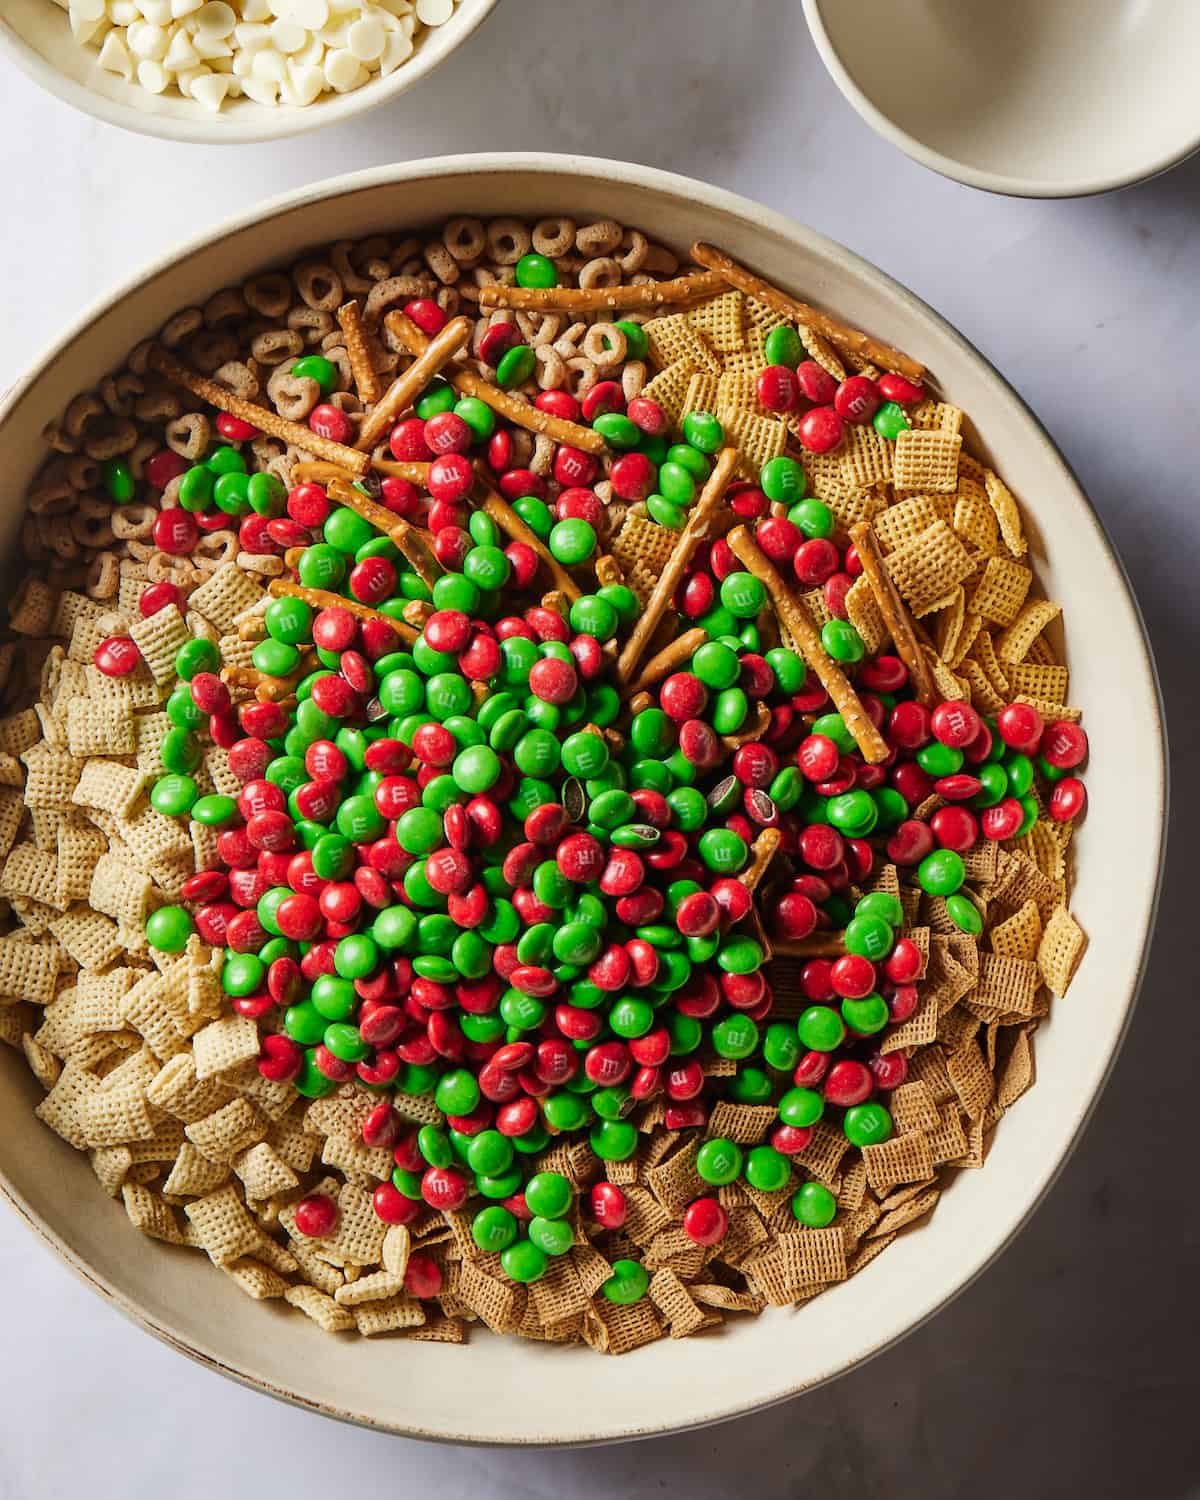 A large white round bowl with corn chex, wheat chex, rice chex, cheerios and pretzel sticks plus red and green M&Ms in it, a small empty bowl and another small bowl with white chocolate chips on its side.